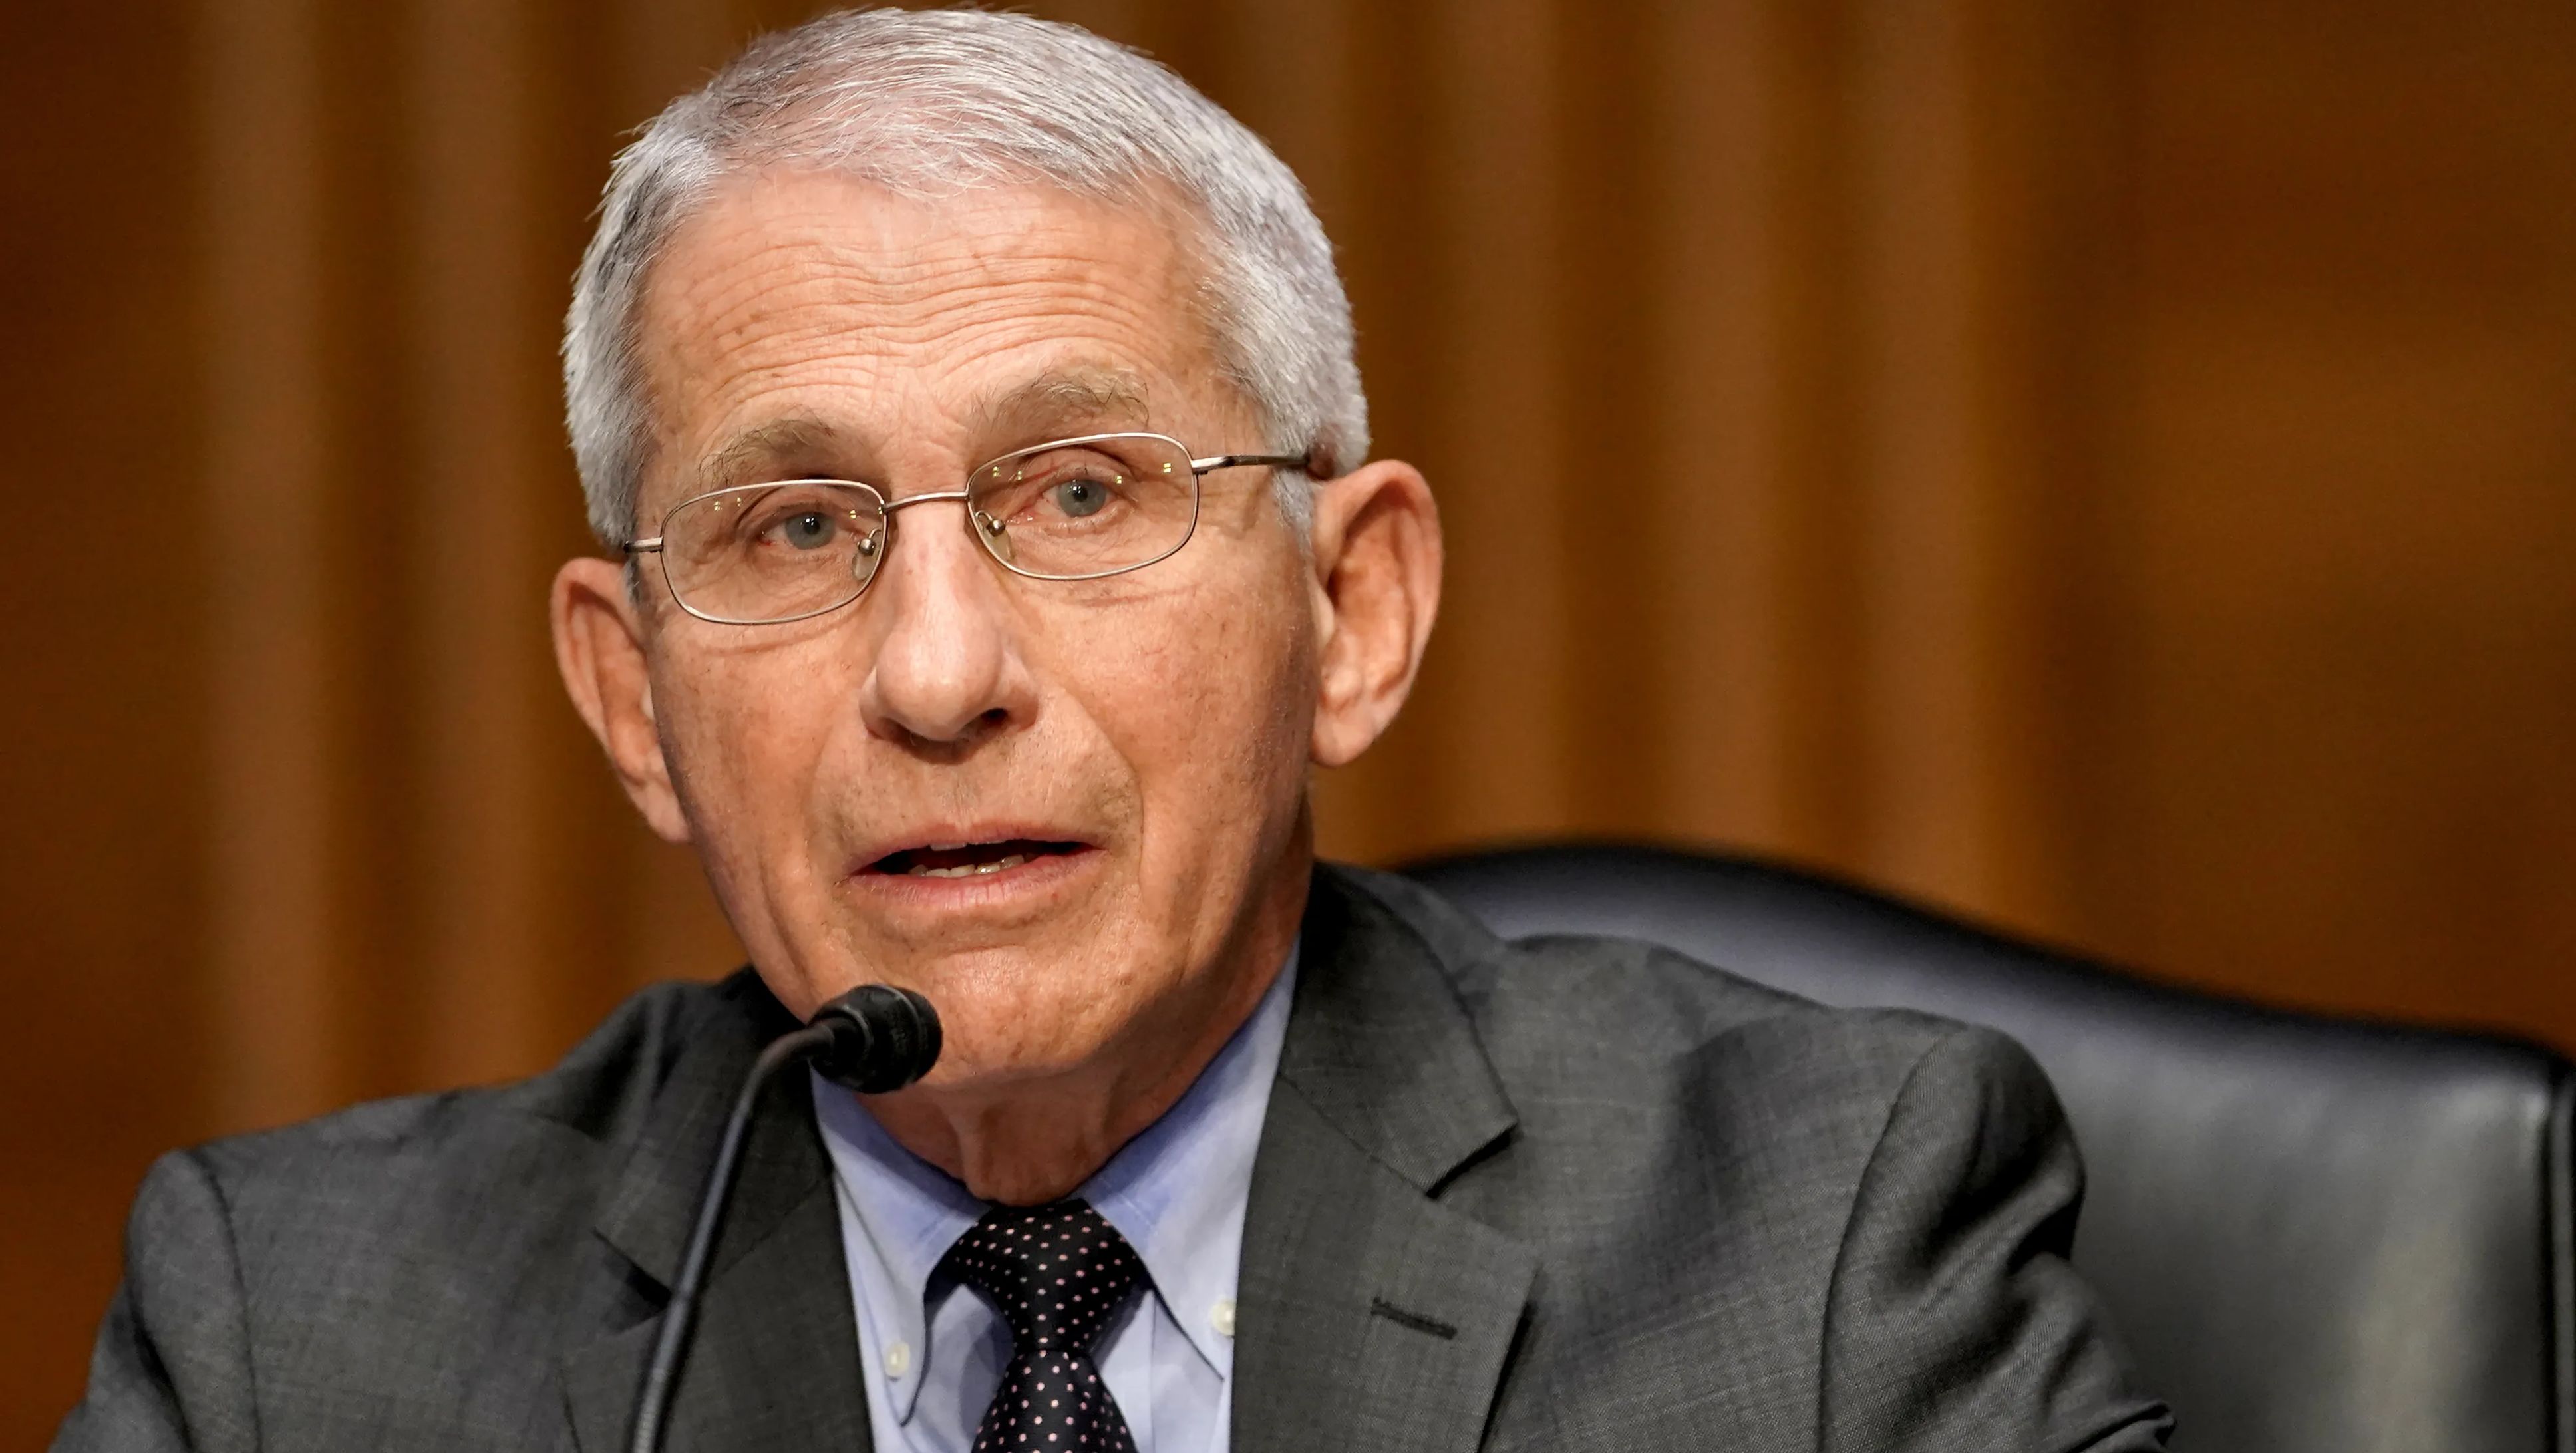 Dr. Anthony Fauci speaks before Congress.